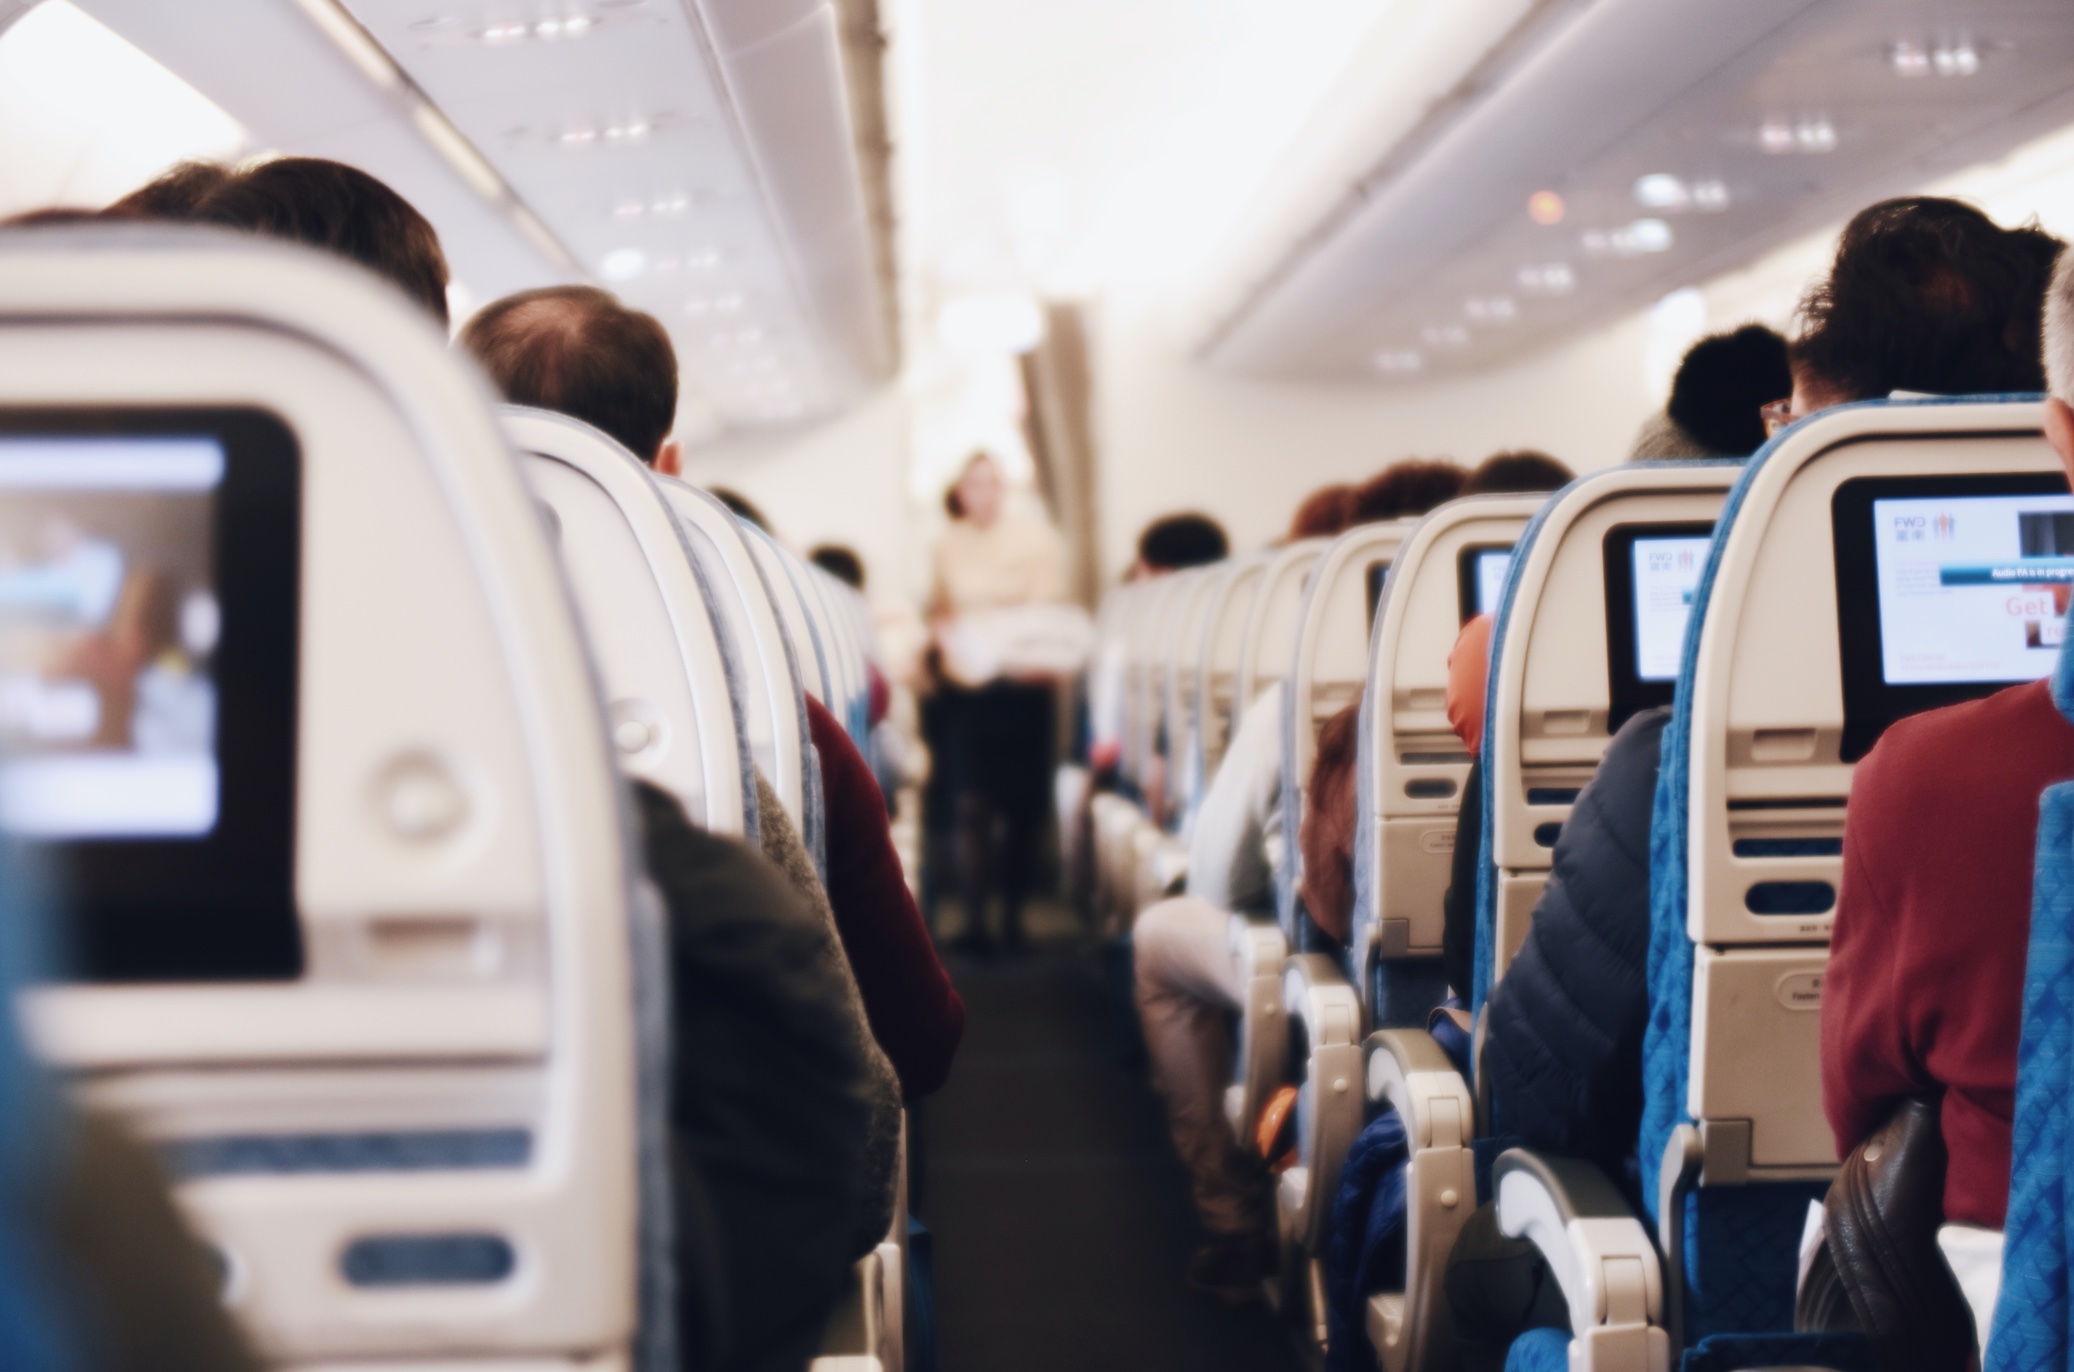 Rearview of passengers on a plane; image by Suhyeon Choi, via Unsplash.com.